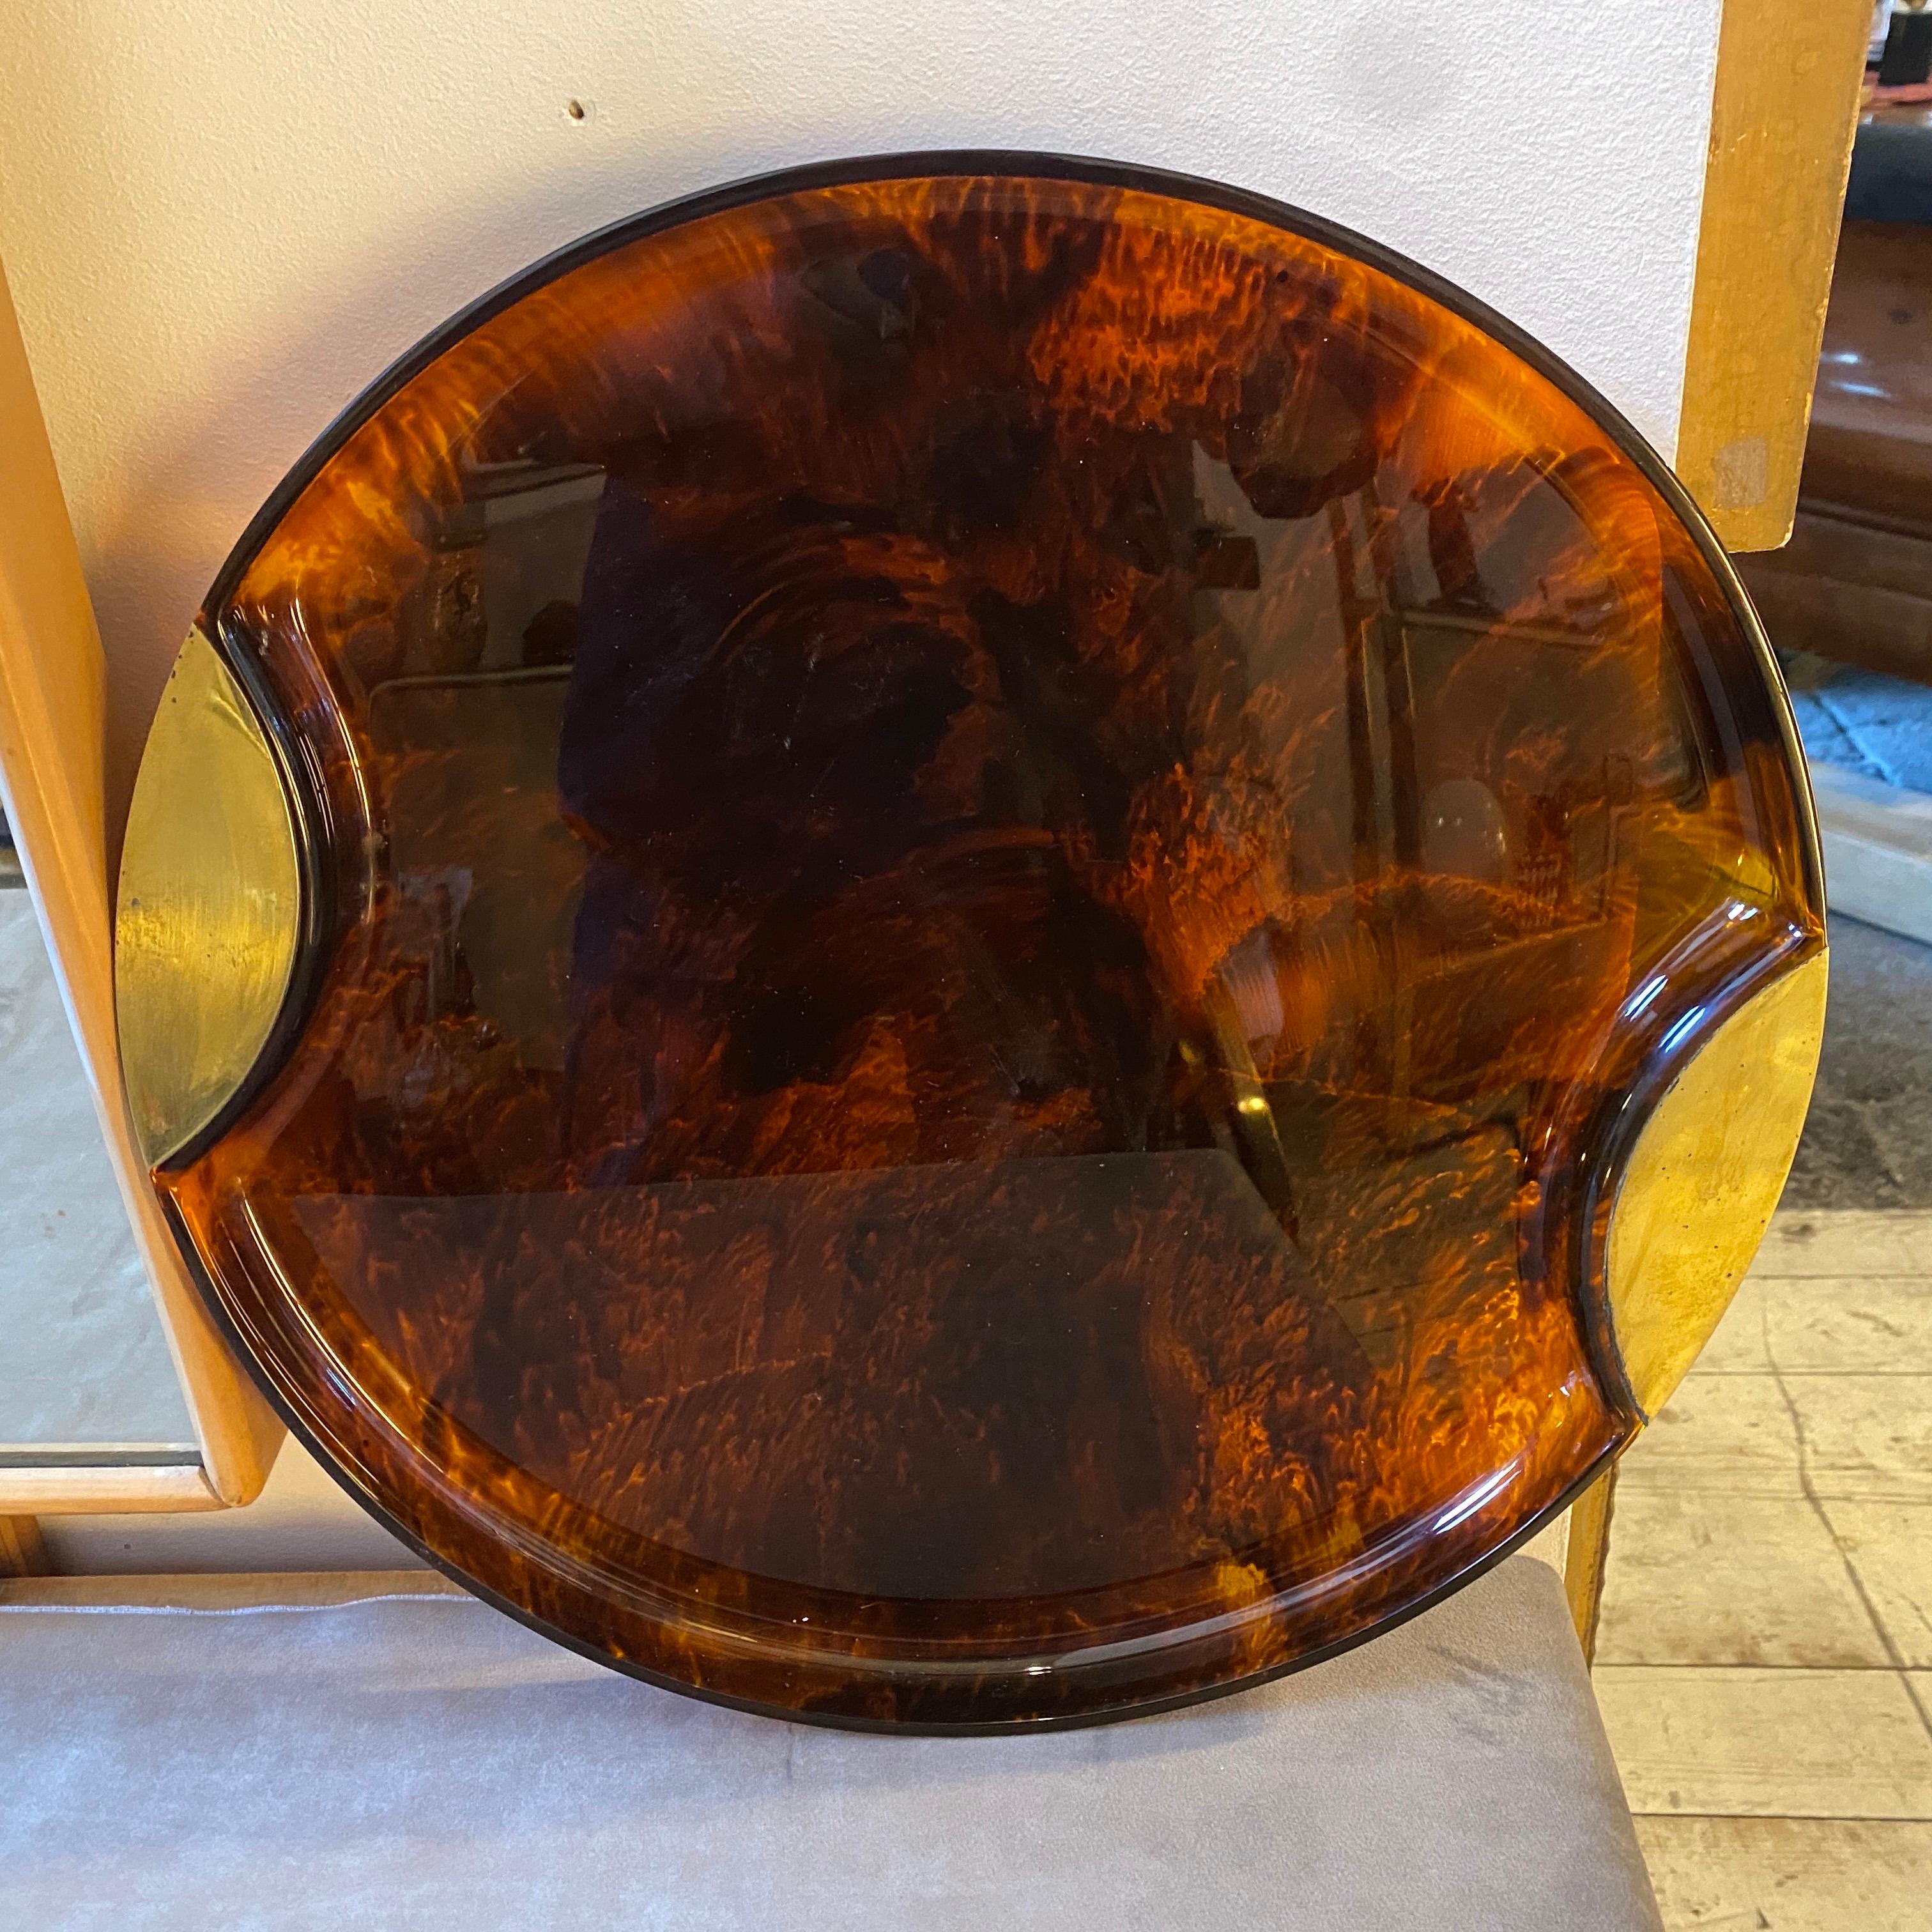 An iconic lucite tray made in Italy in the Seventies by Guzzini, it's in very good conditions, brass in original patina. It can be used as a centerpiece or as a serving tray.